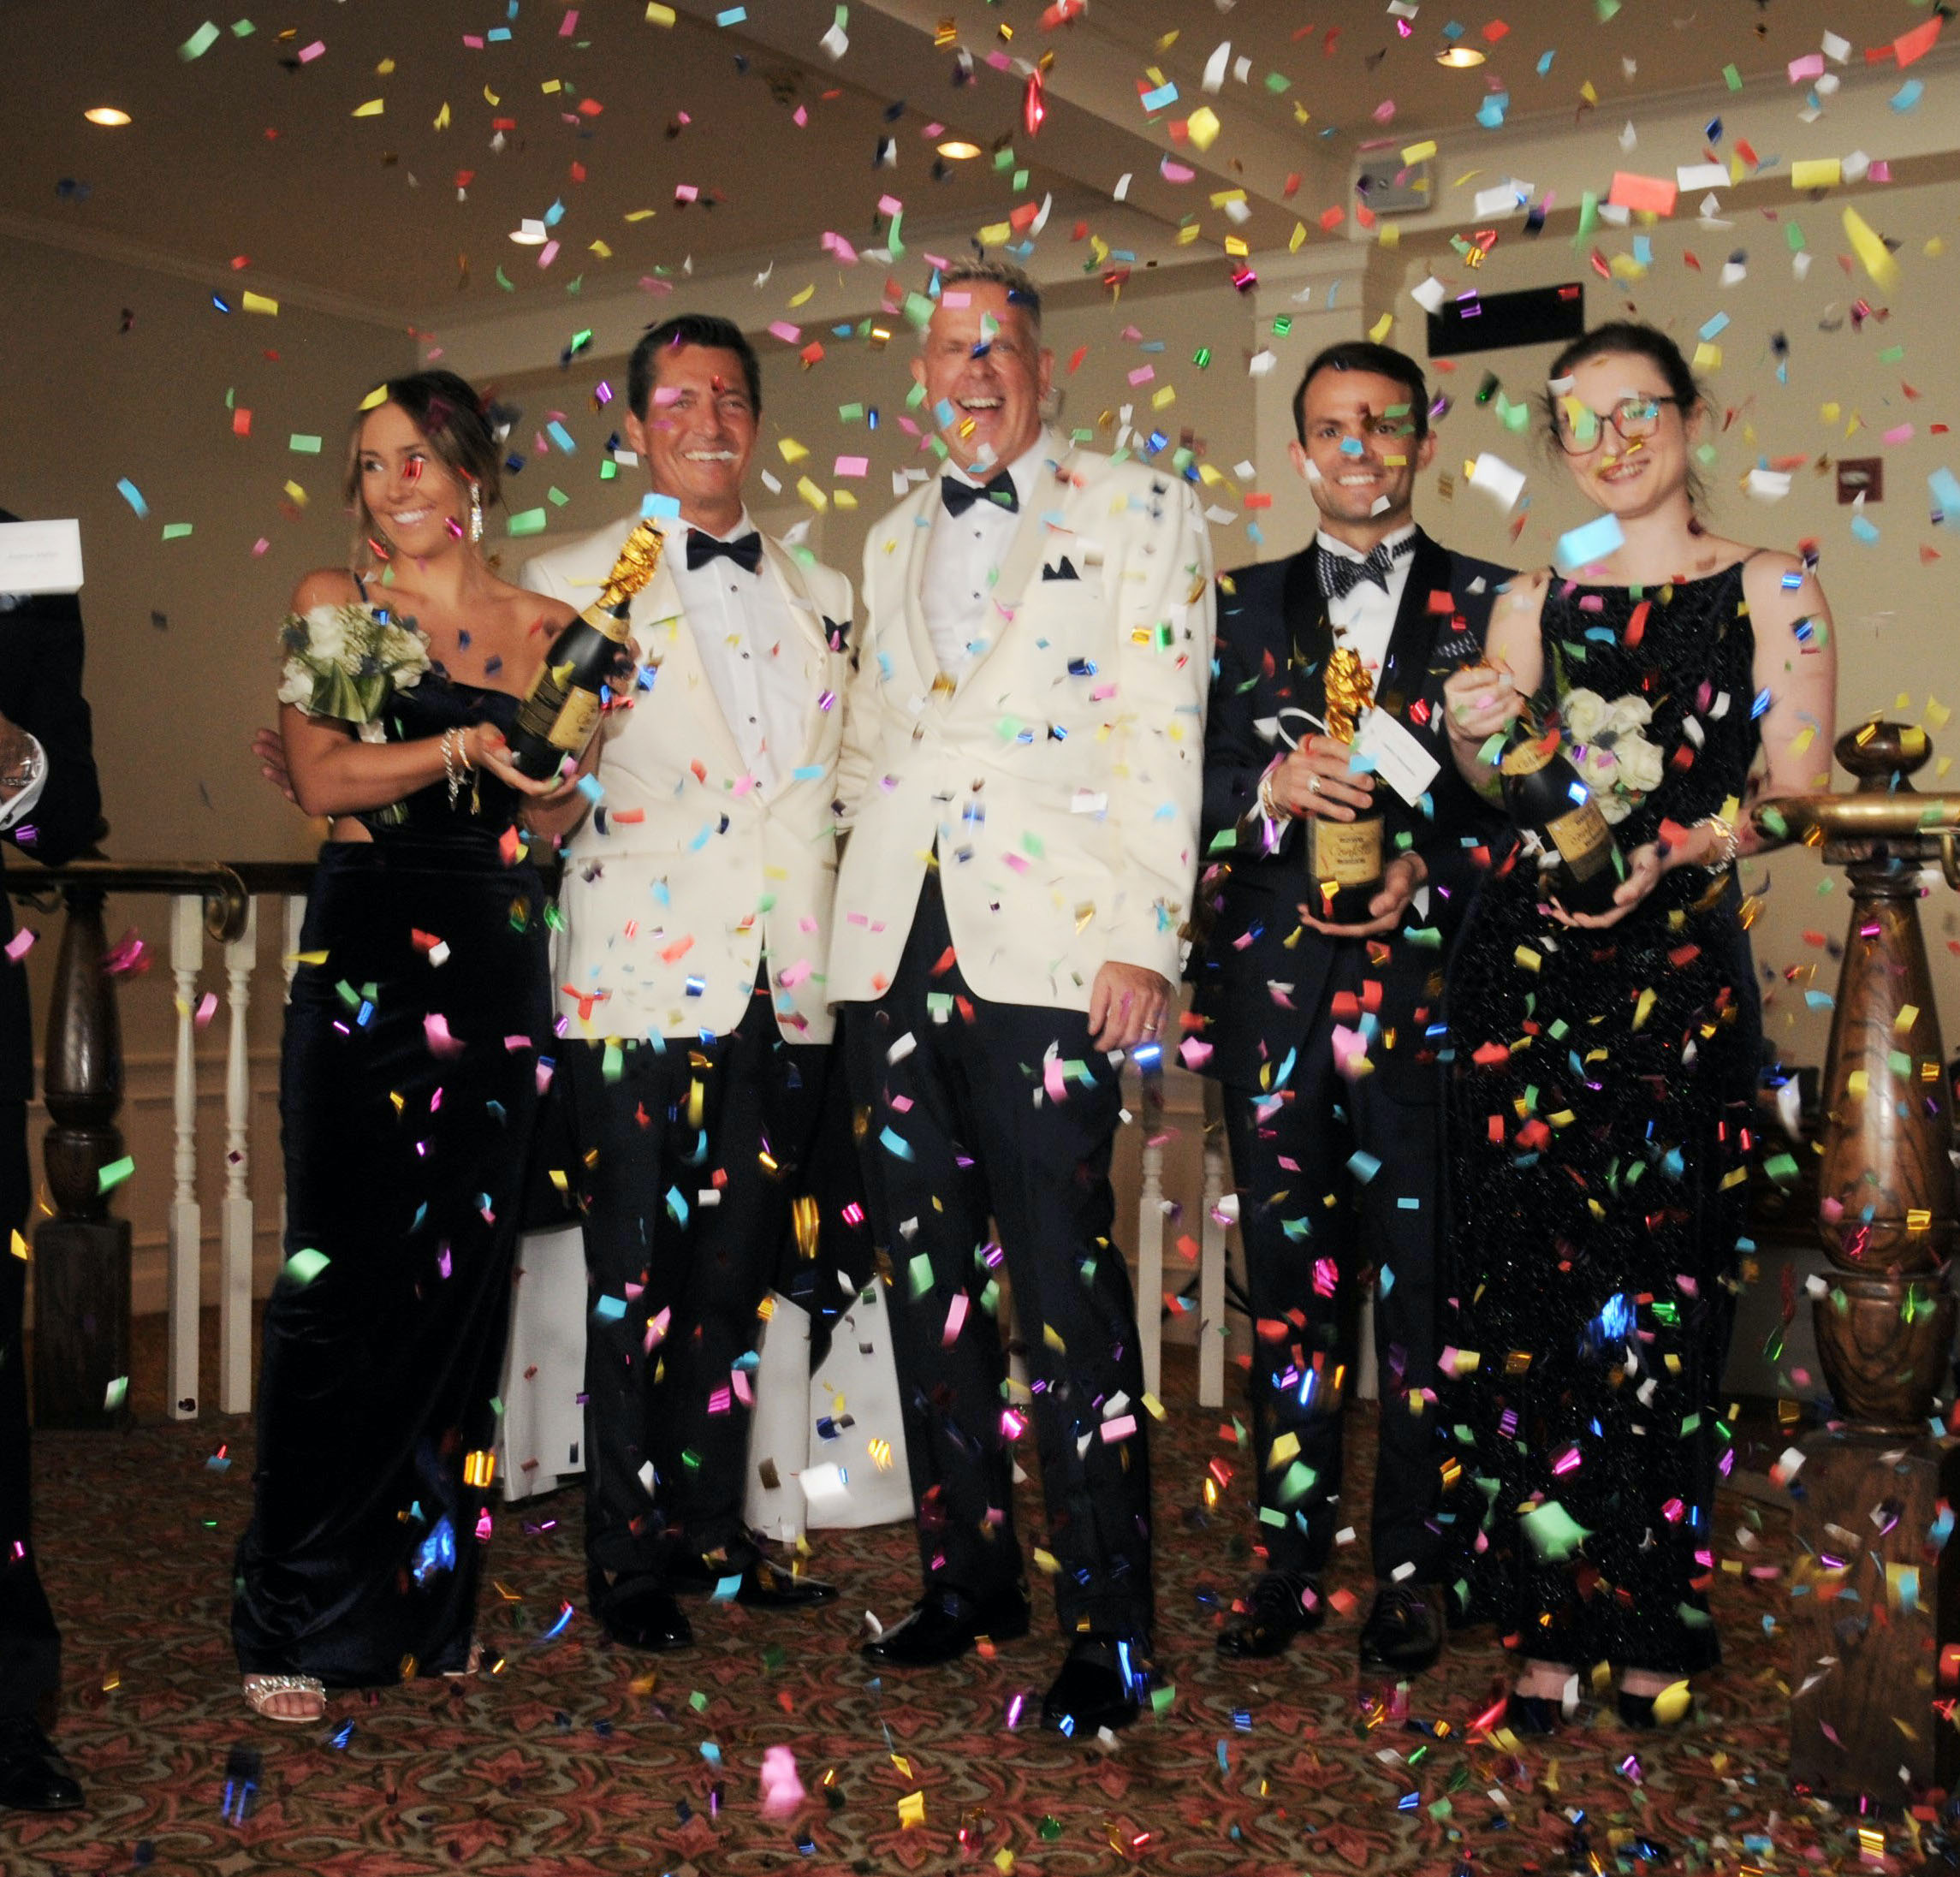 Colorful confetti explodes into the air with the groom and groom smiling behind at their wedding ceremony.